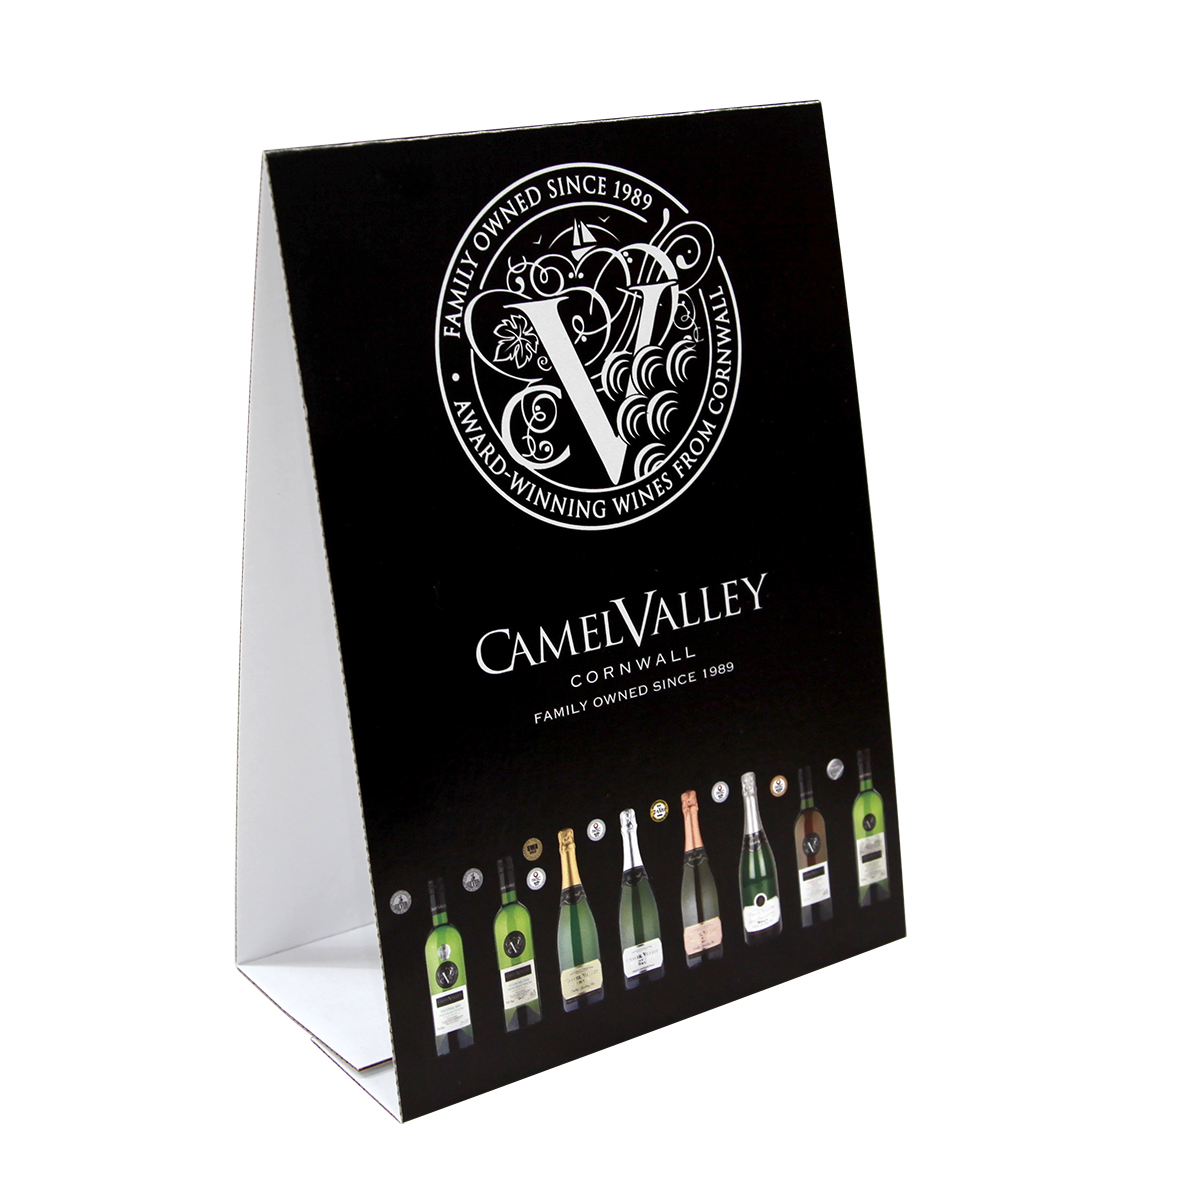  Camel Valley – Tent card